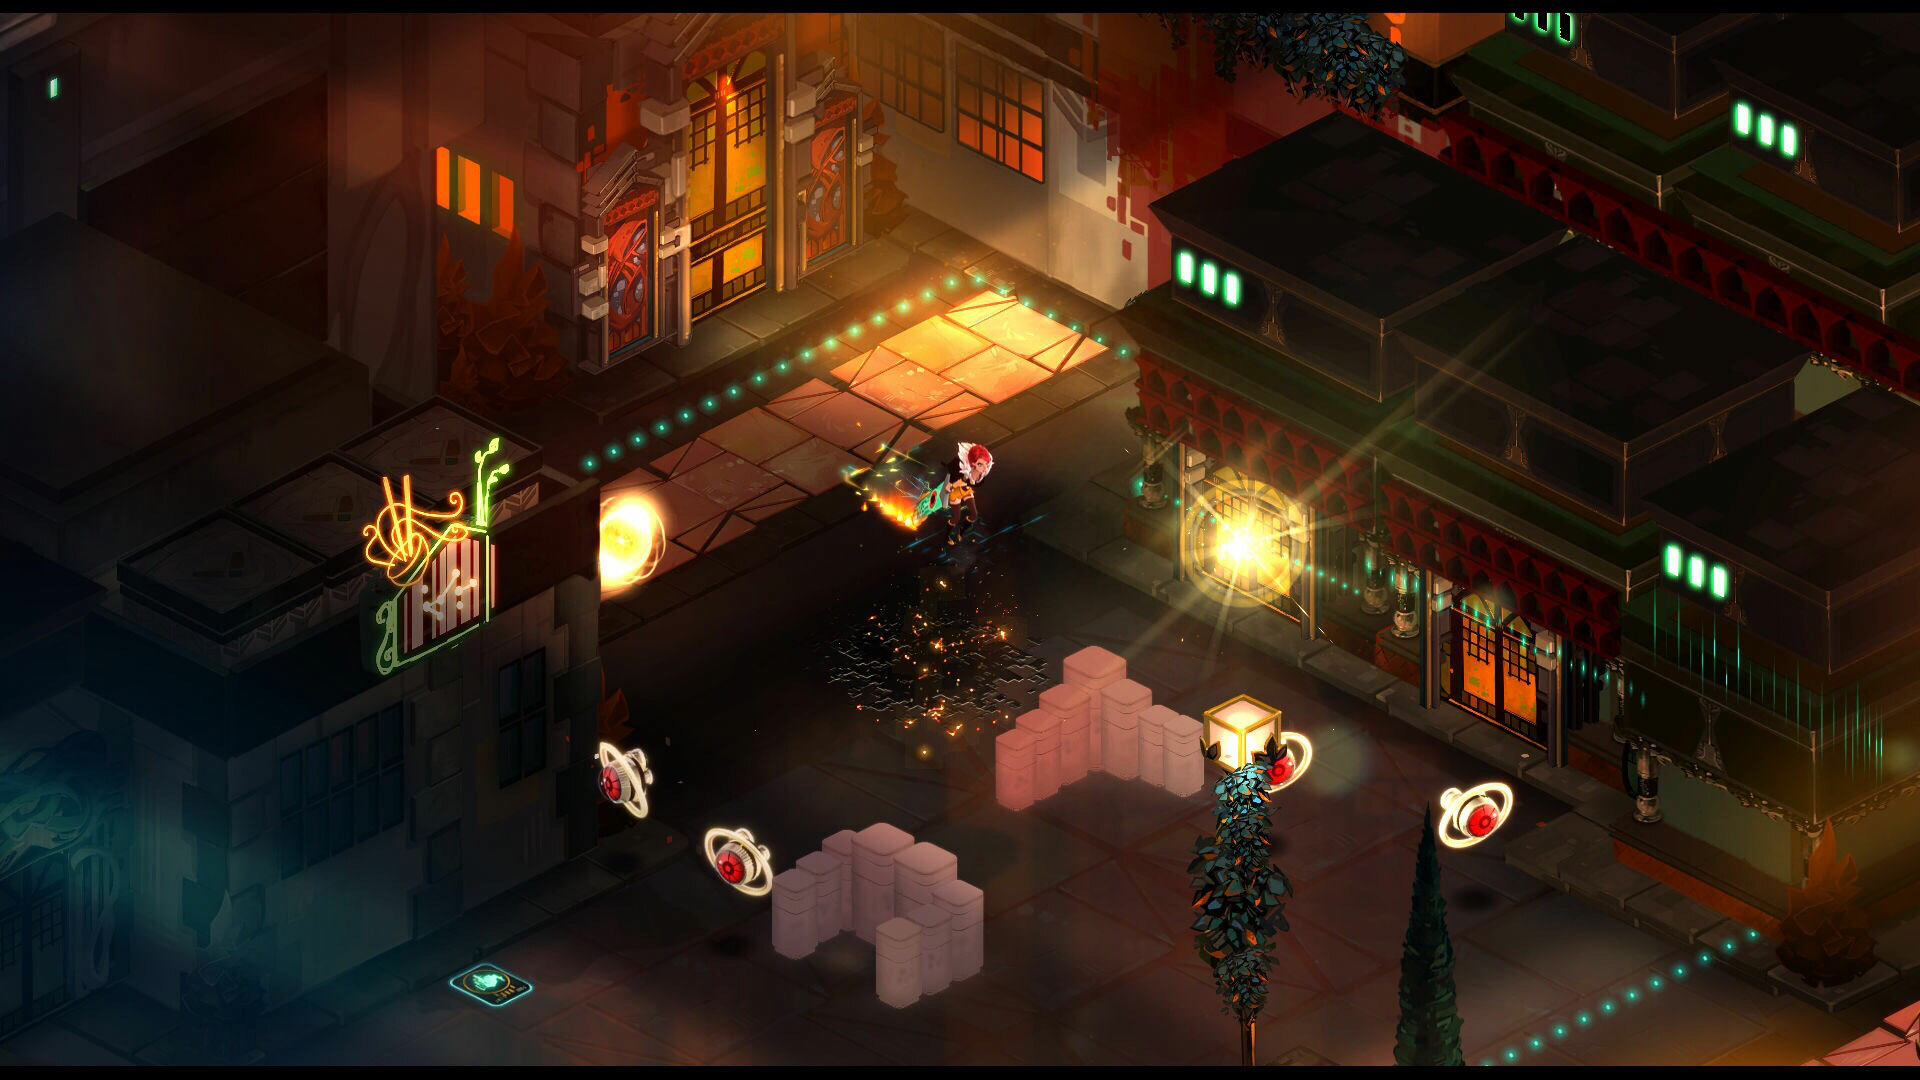 The best action adventure game for Apple TV: Transistor